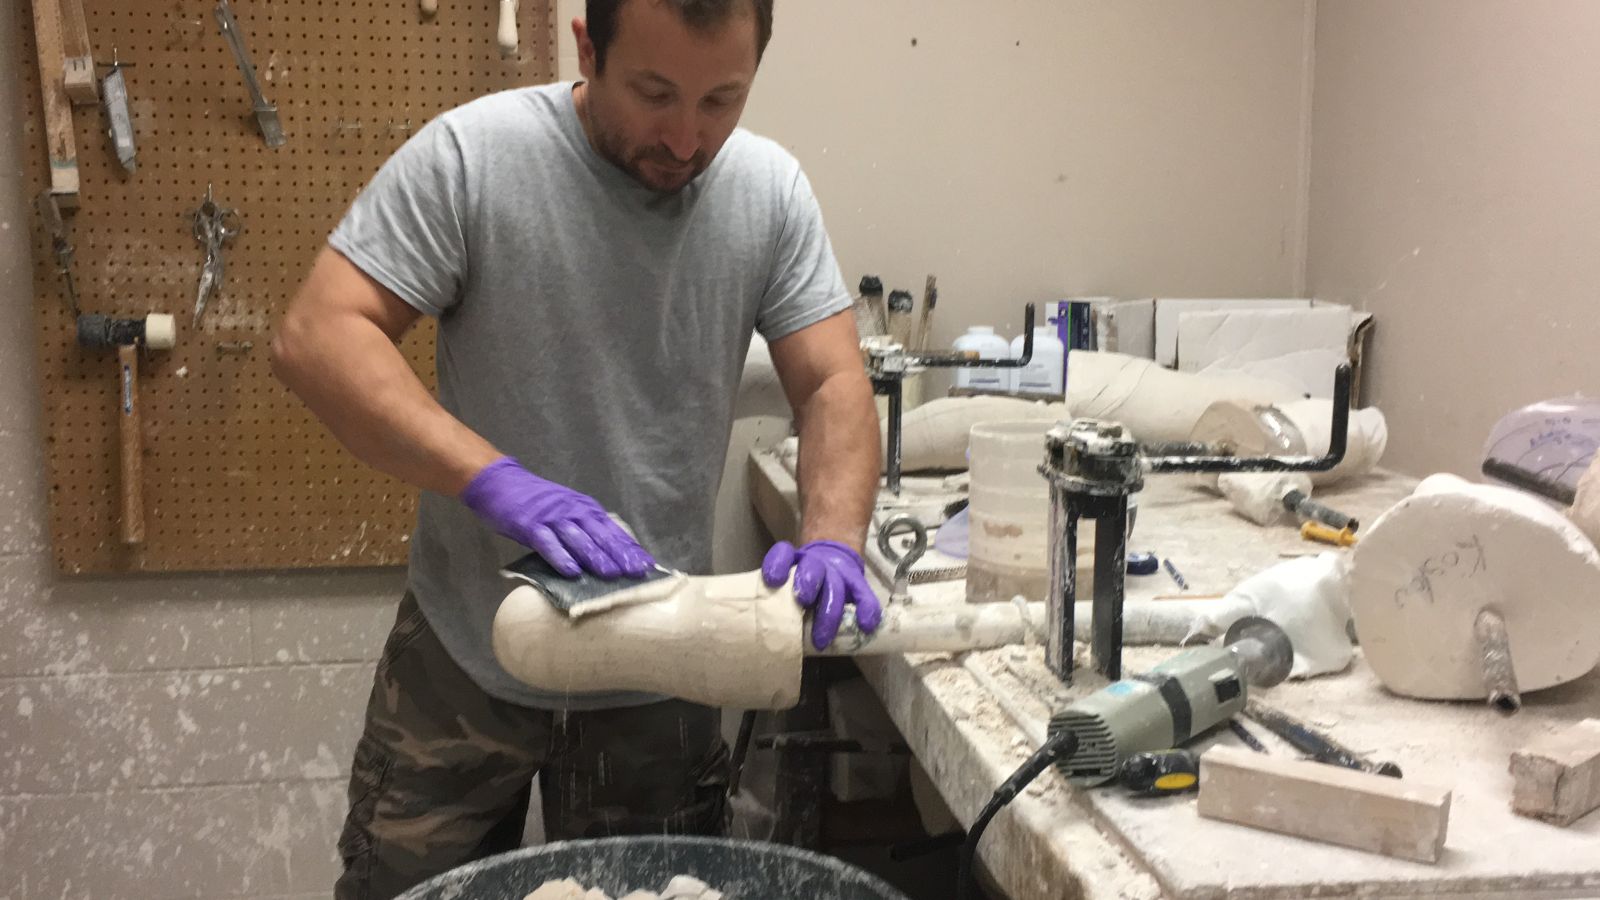 Jamie working on building a leg at the lab